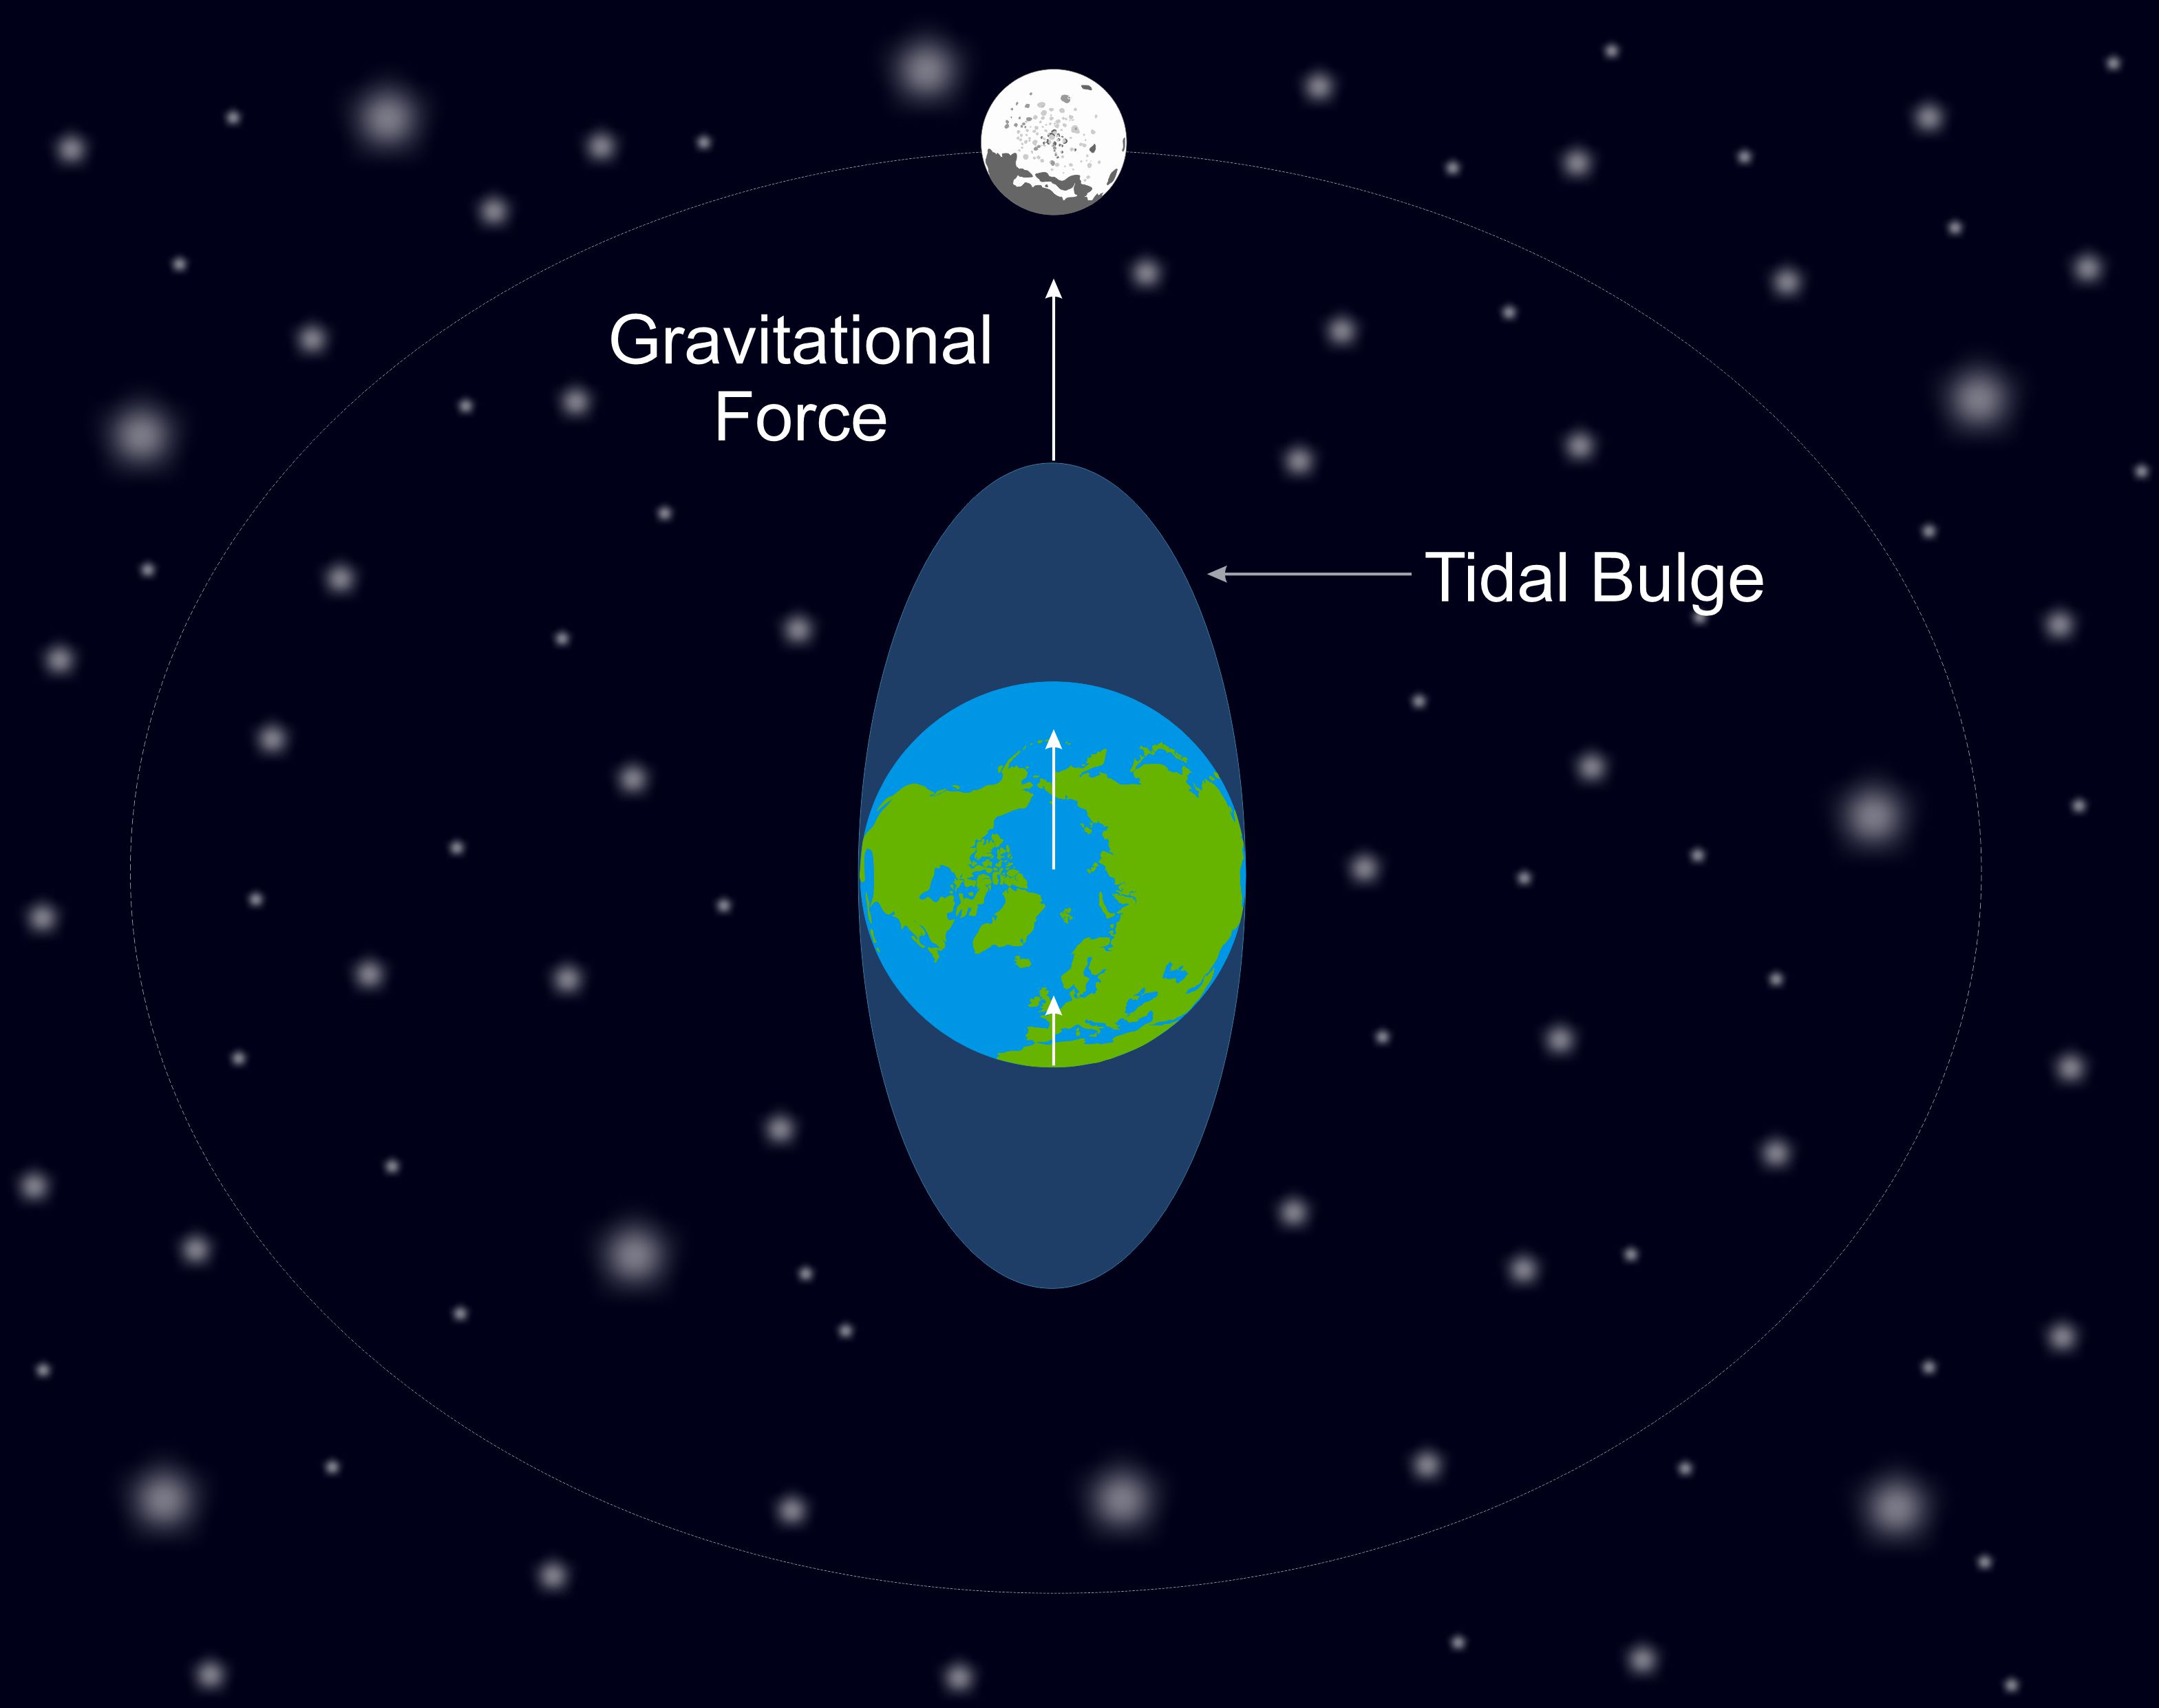 The gravitational force exerted on Earth by the Moon is strongest on the side closest to the Moon (depicted with arrow lengths). This stretches the Earth’s surface, creating a tidal bulge at the sides of the Earth closest and furthest from the Moon